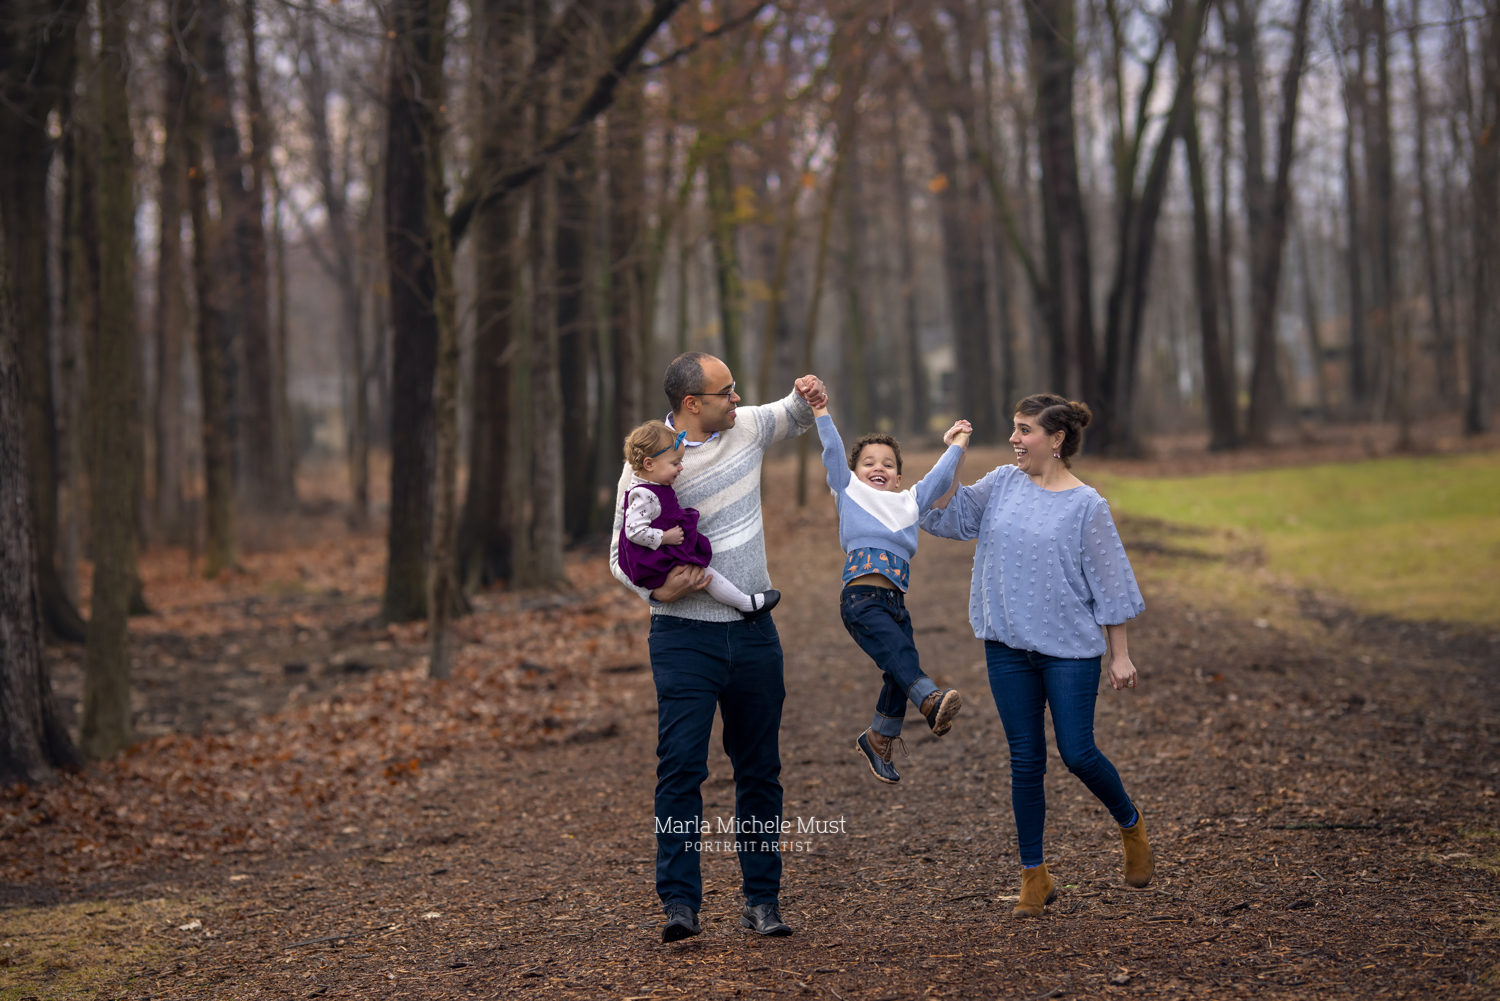 A family of four walk among autumn leaves in the forest as part of a fall family photoshoot near Detroit.